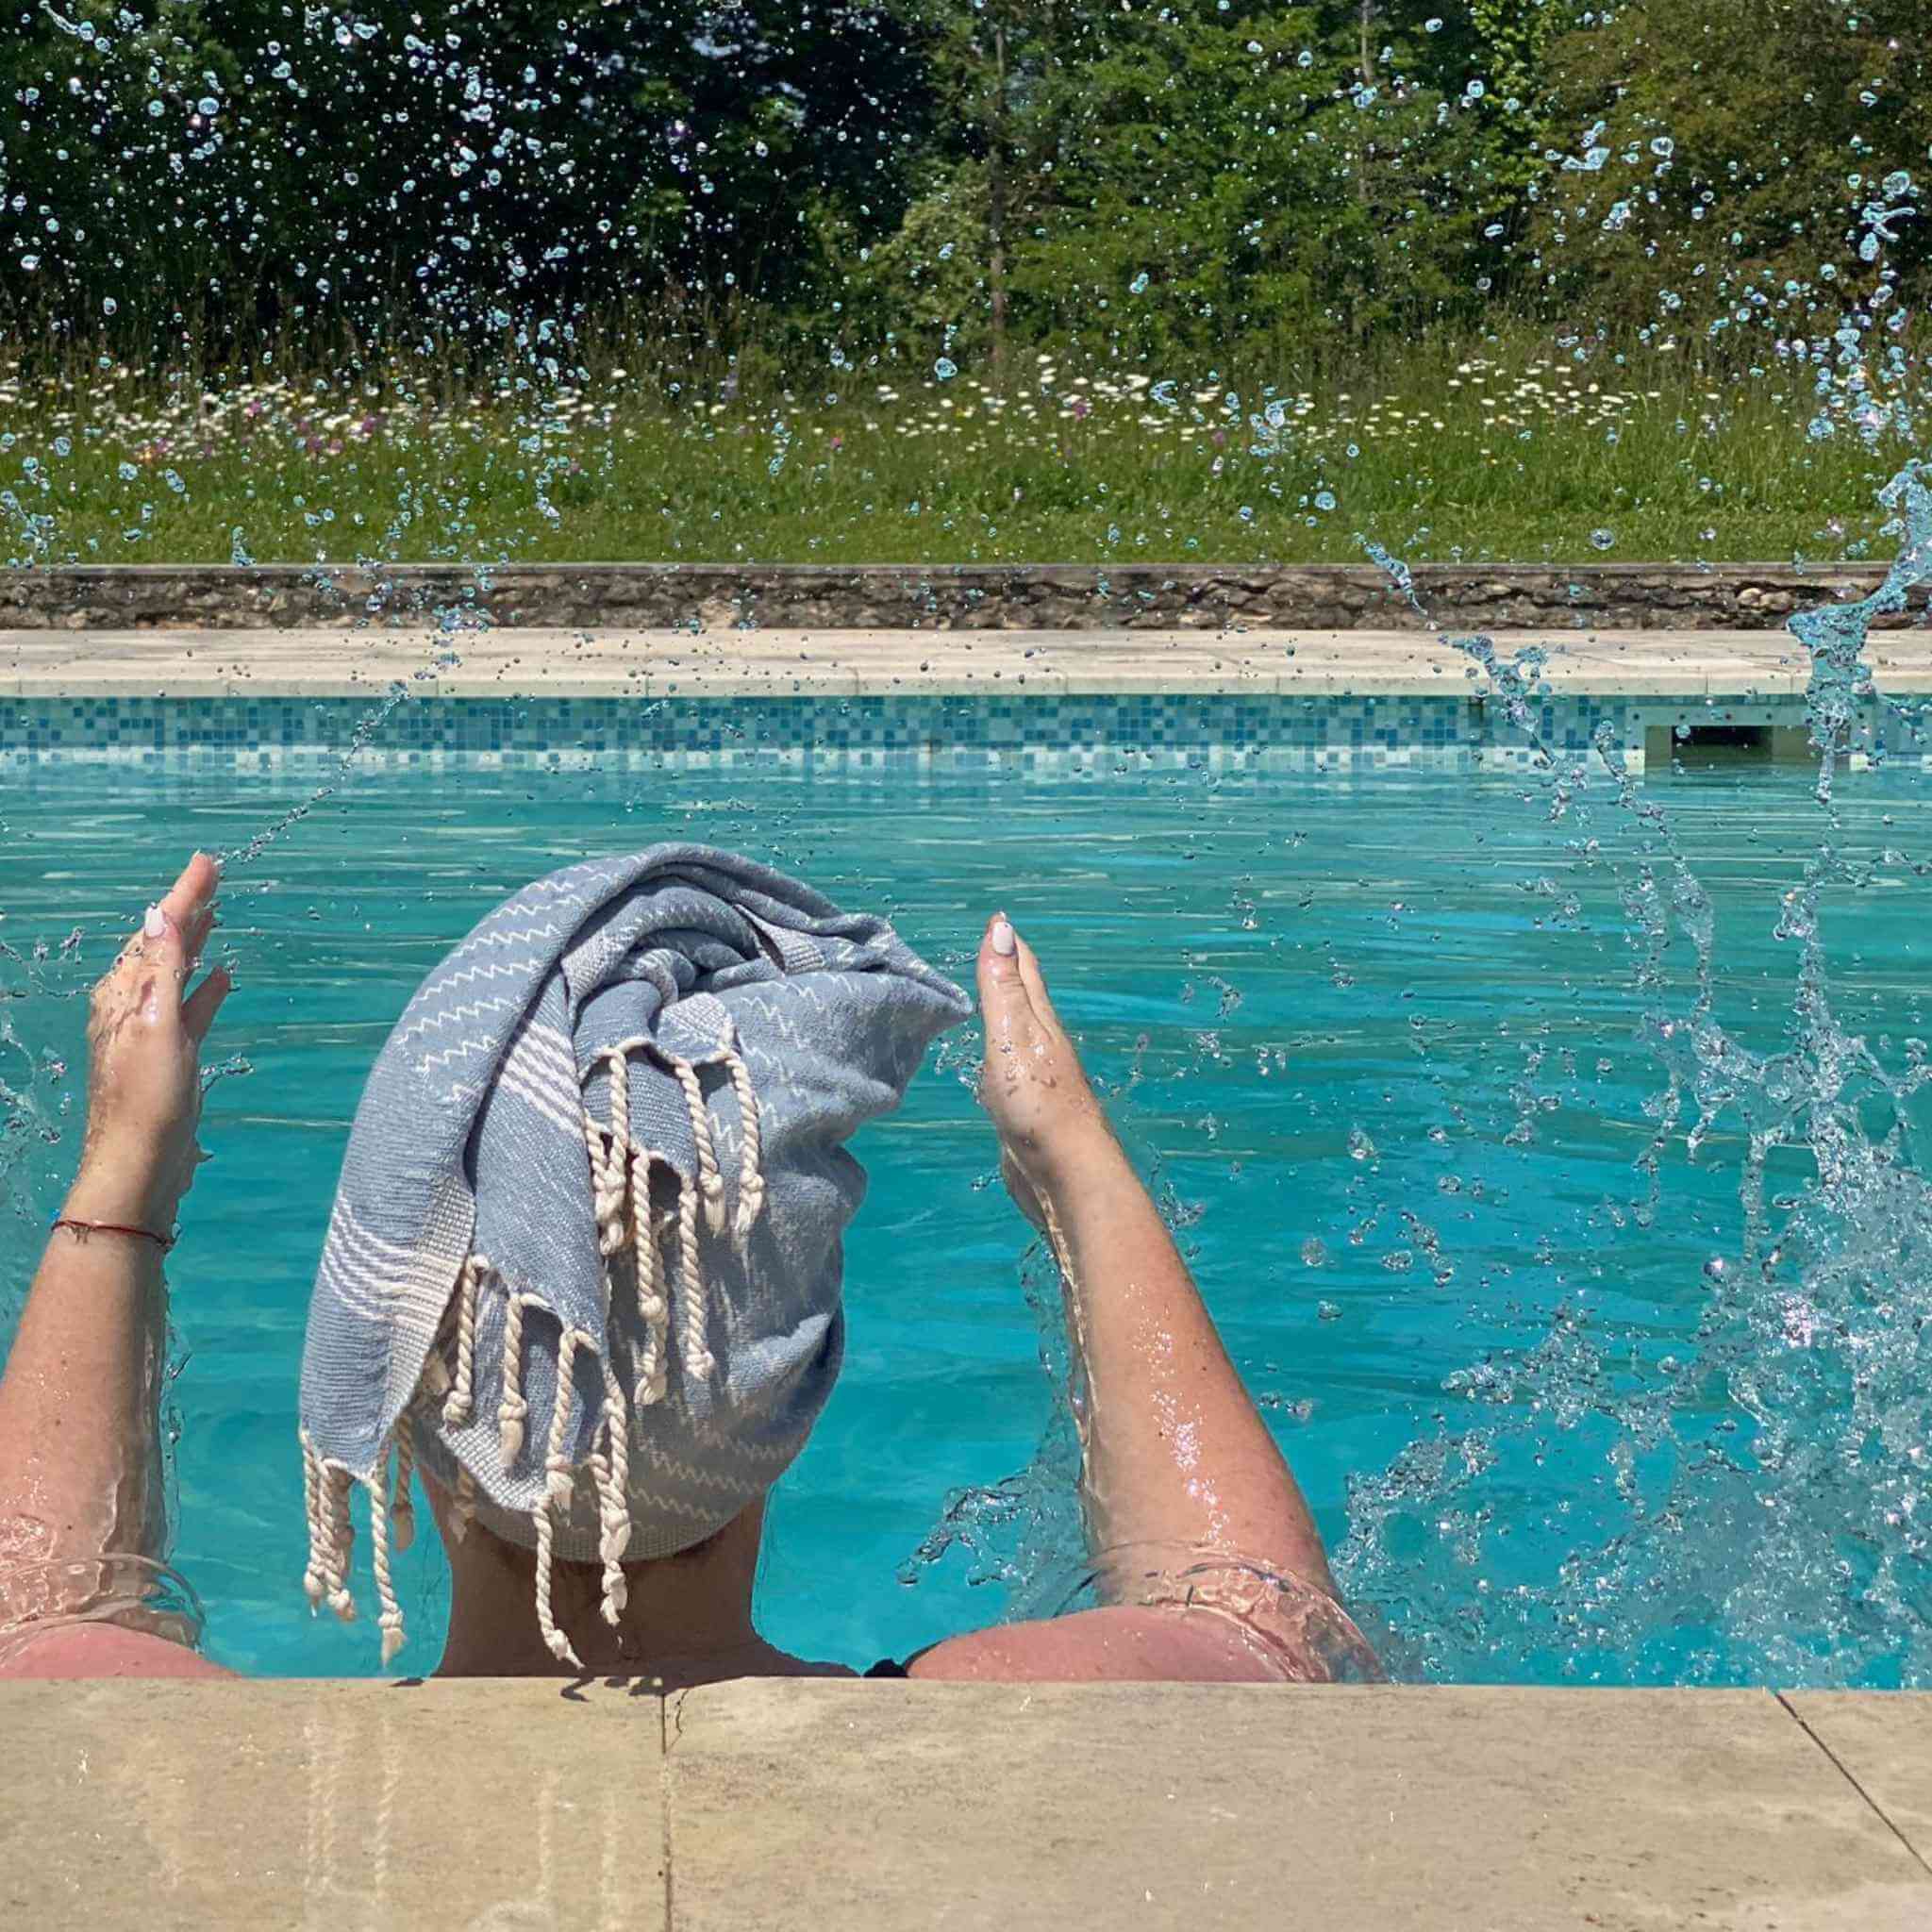 Lady splashes water in swimming pool wearing a pale blue hair towel